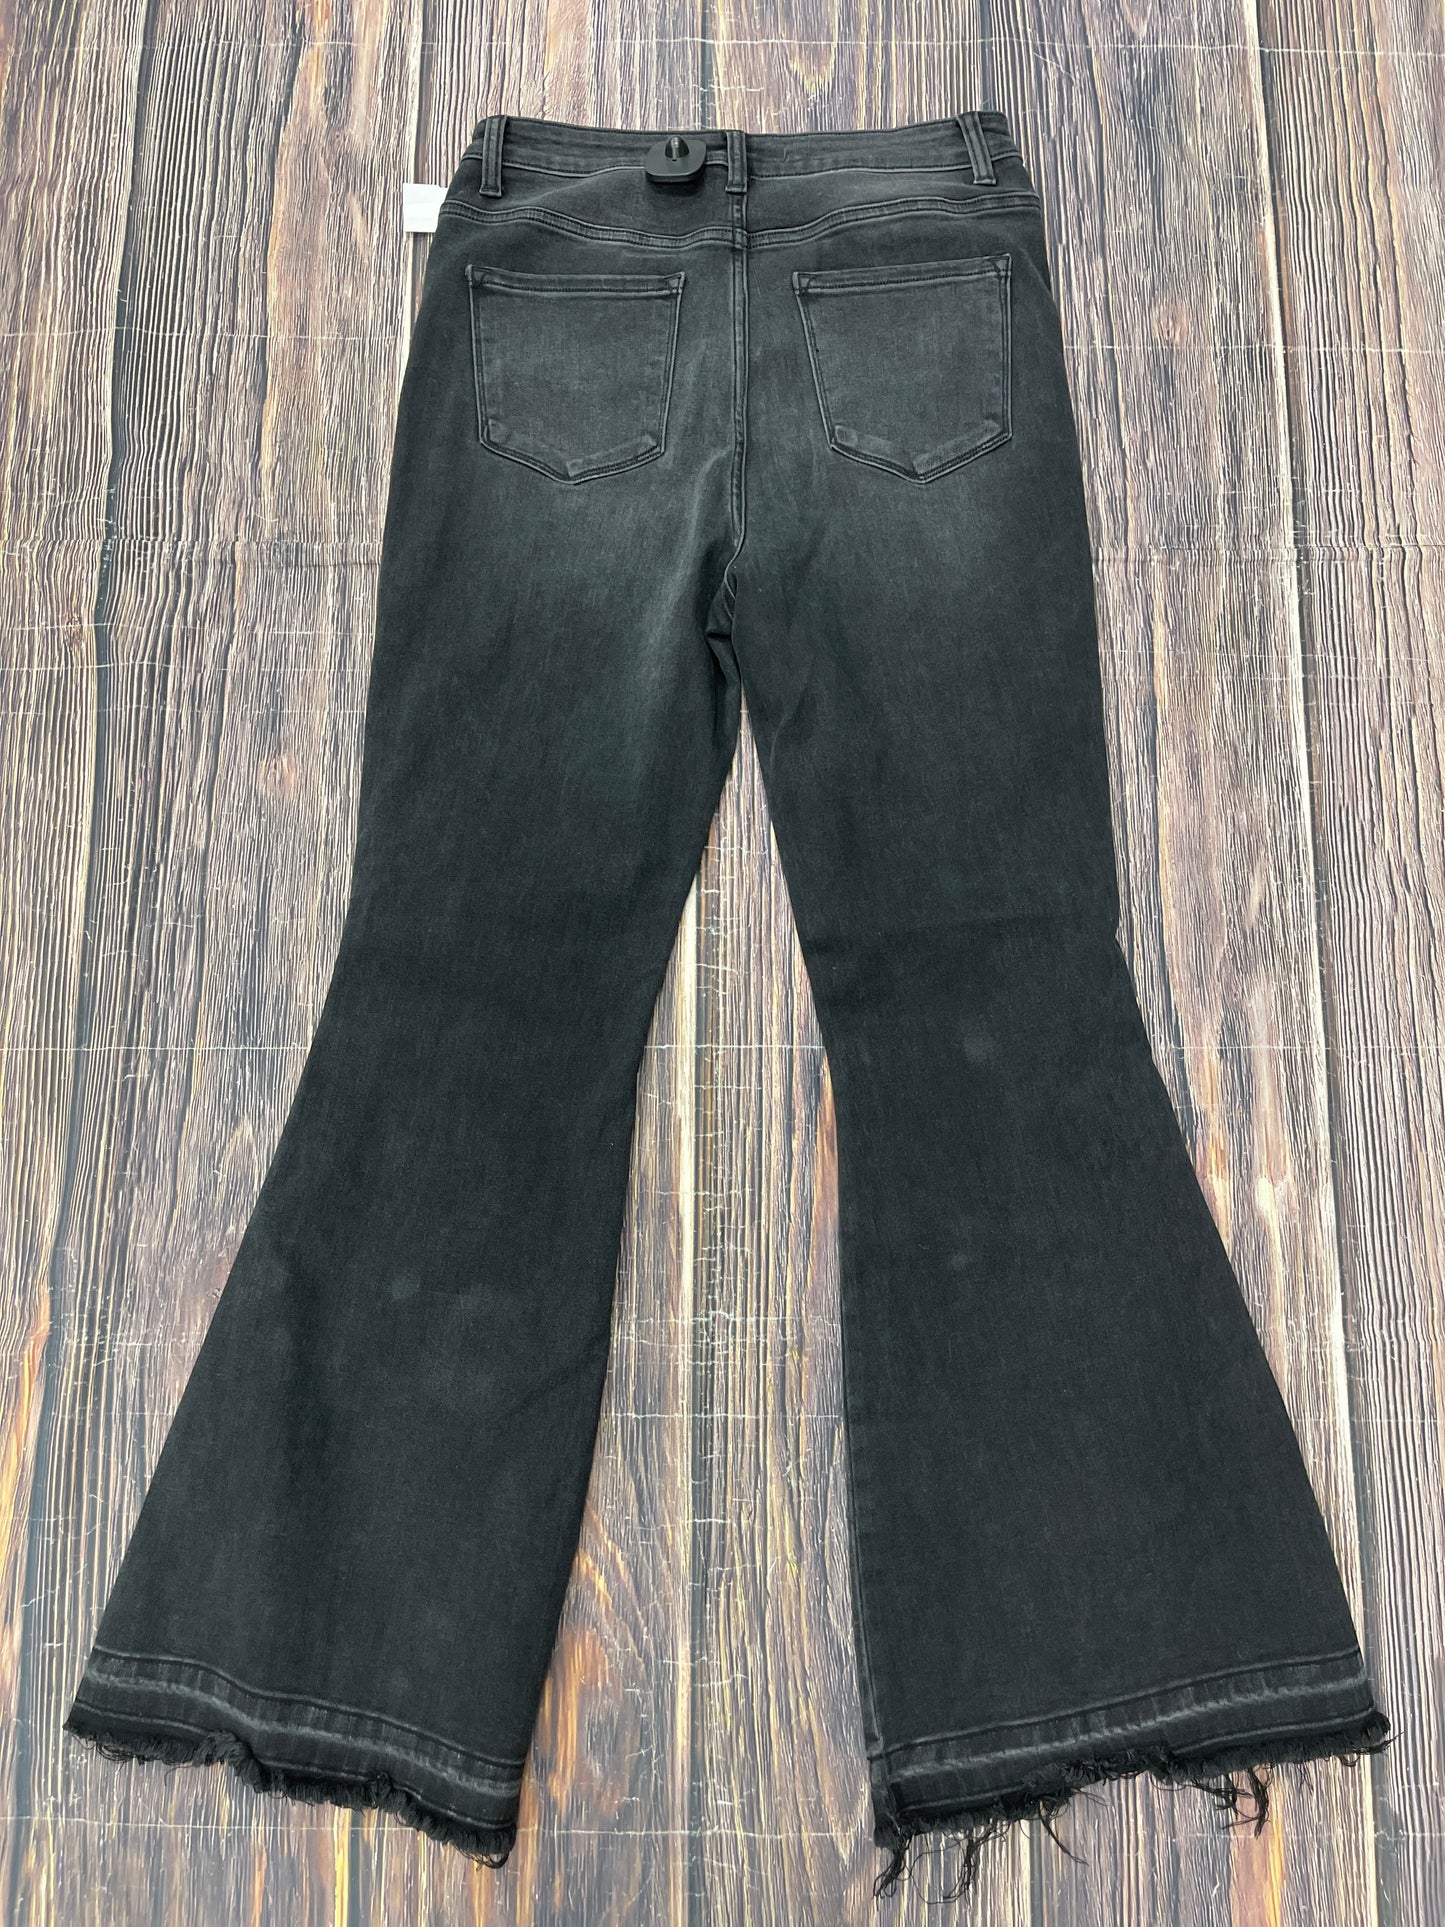 Jeans Flared By Flying Monkey  Size: 12